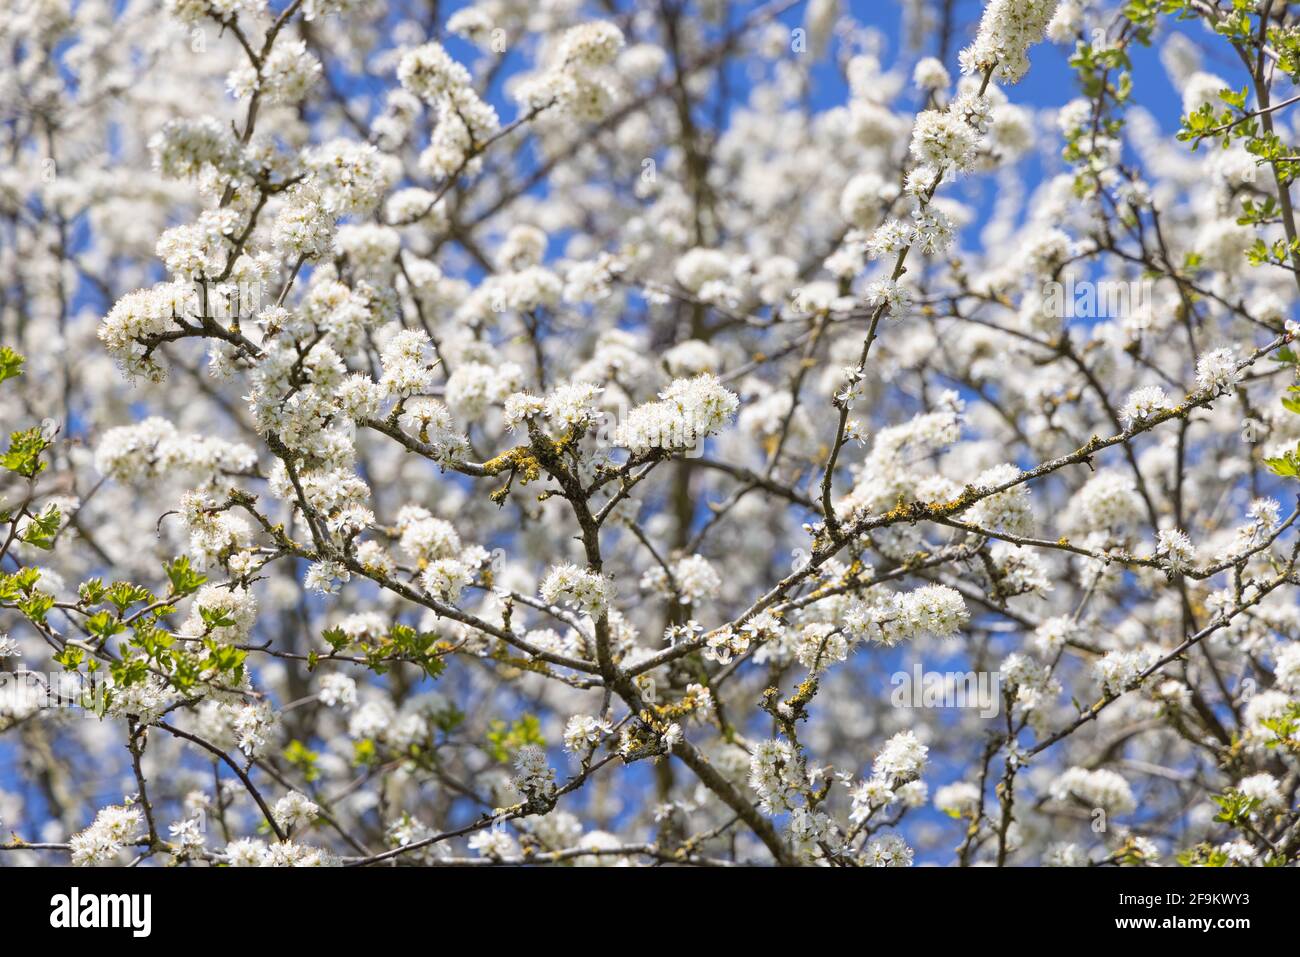 Crick, Northamptonshire, UK - April 19th 2021: A profusion of white blackthorn (Prunus spinosa) blossoms grow on moss-covered twigs in a hedgerow. Stock Photo